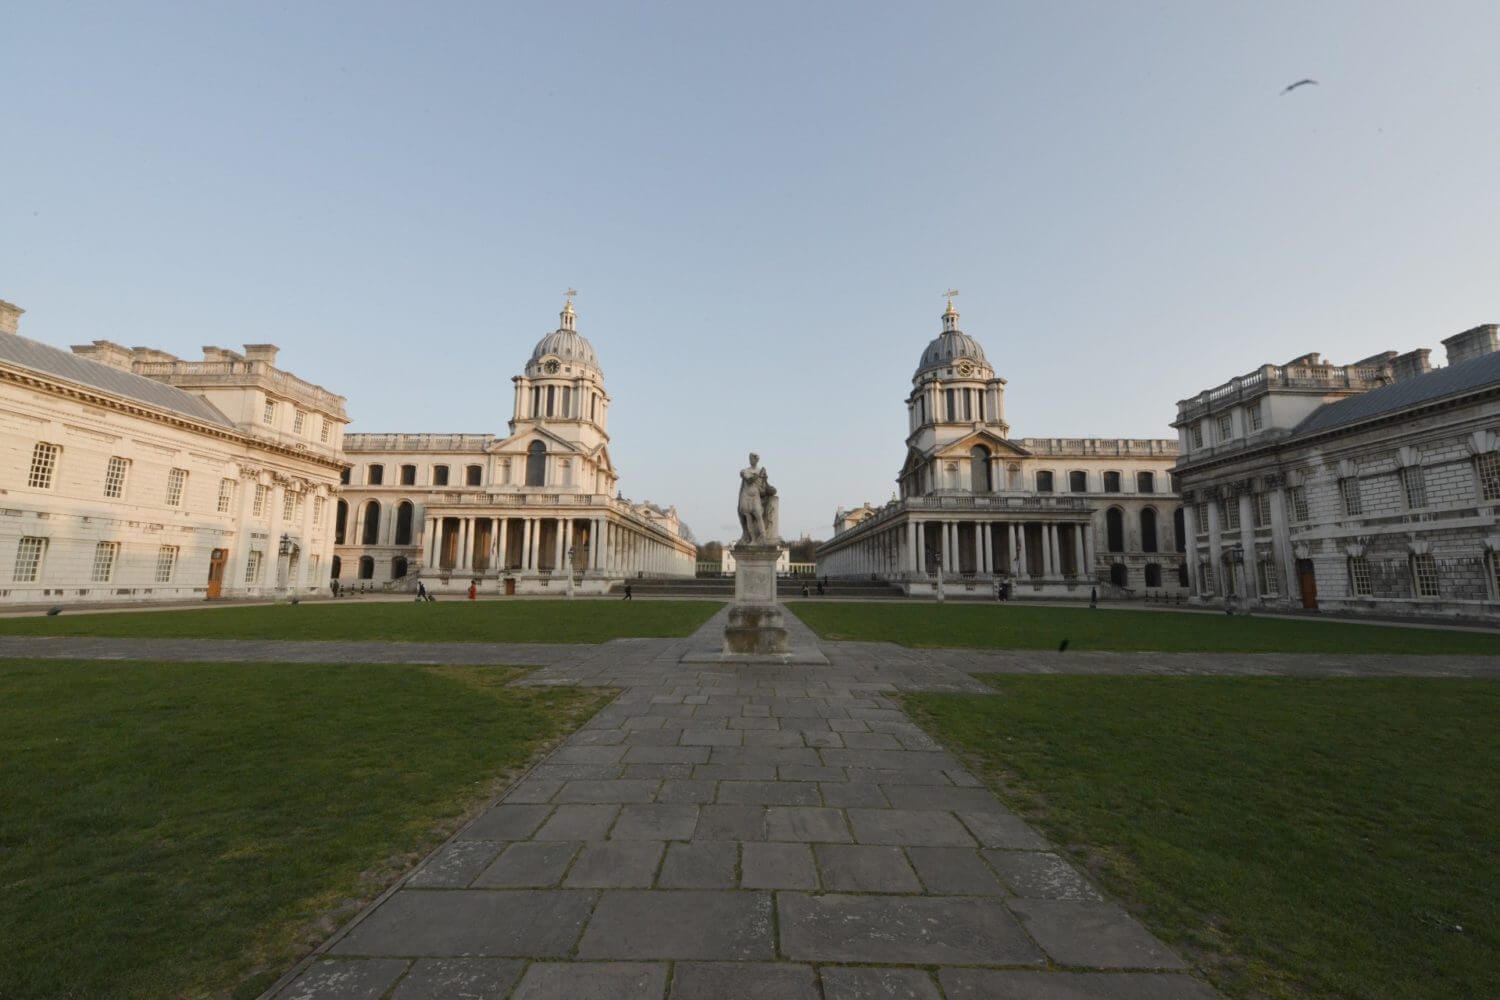 Old Royal Naval College - Photo credit: Fantrippers